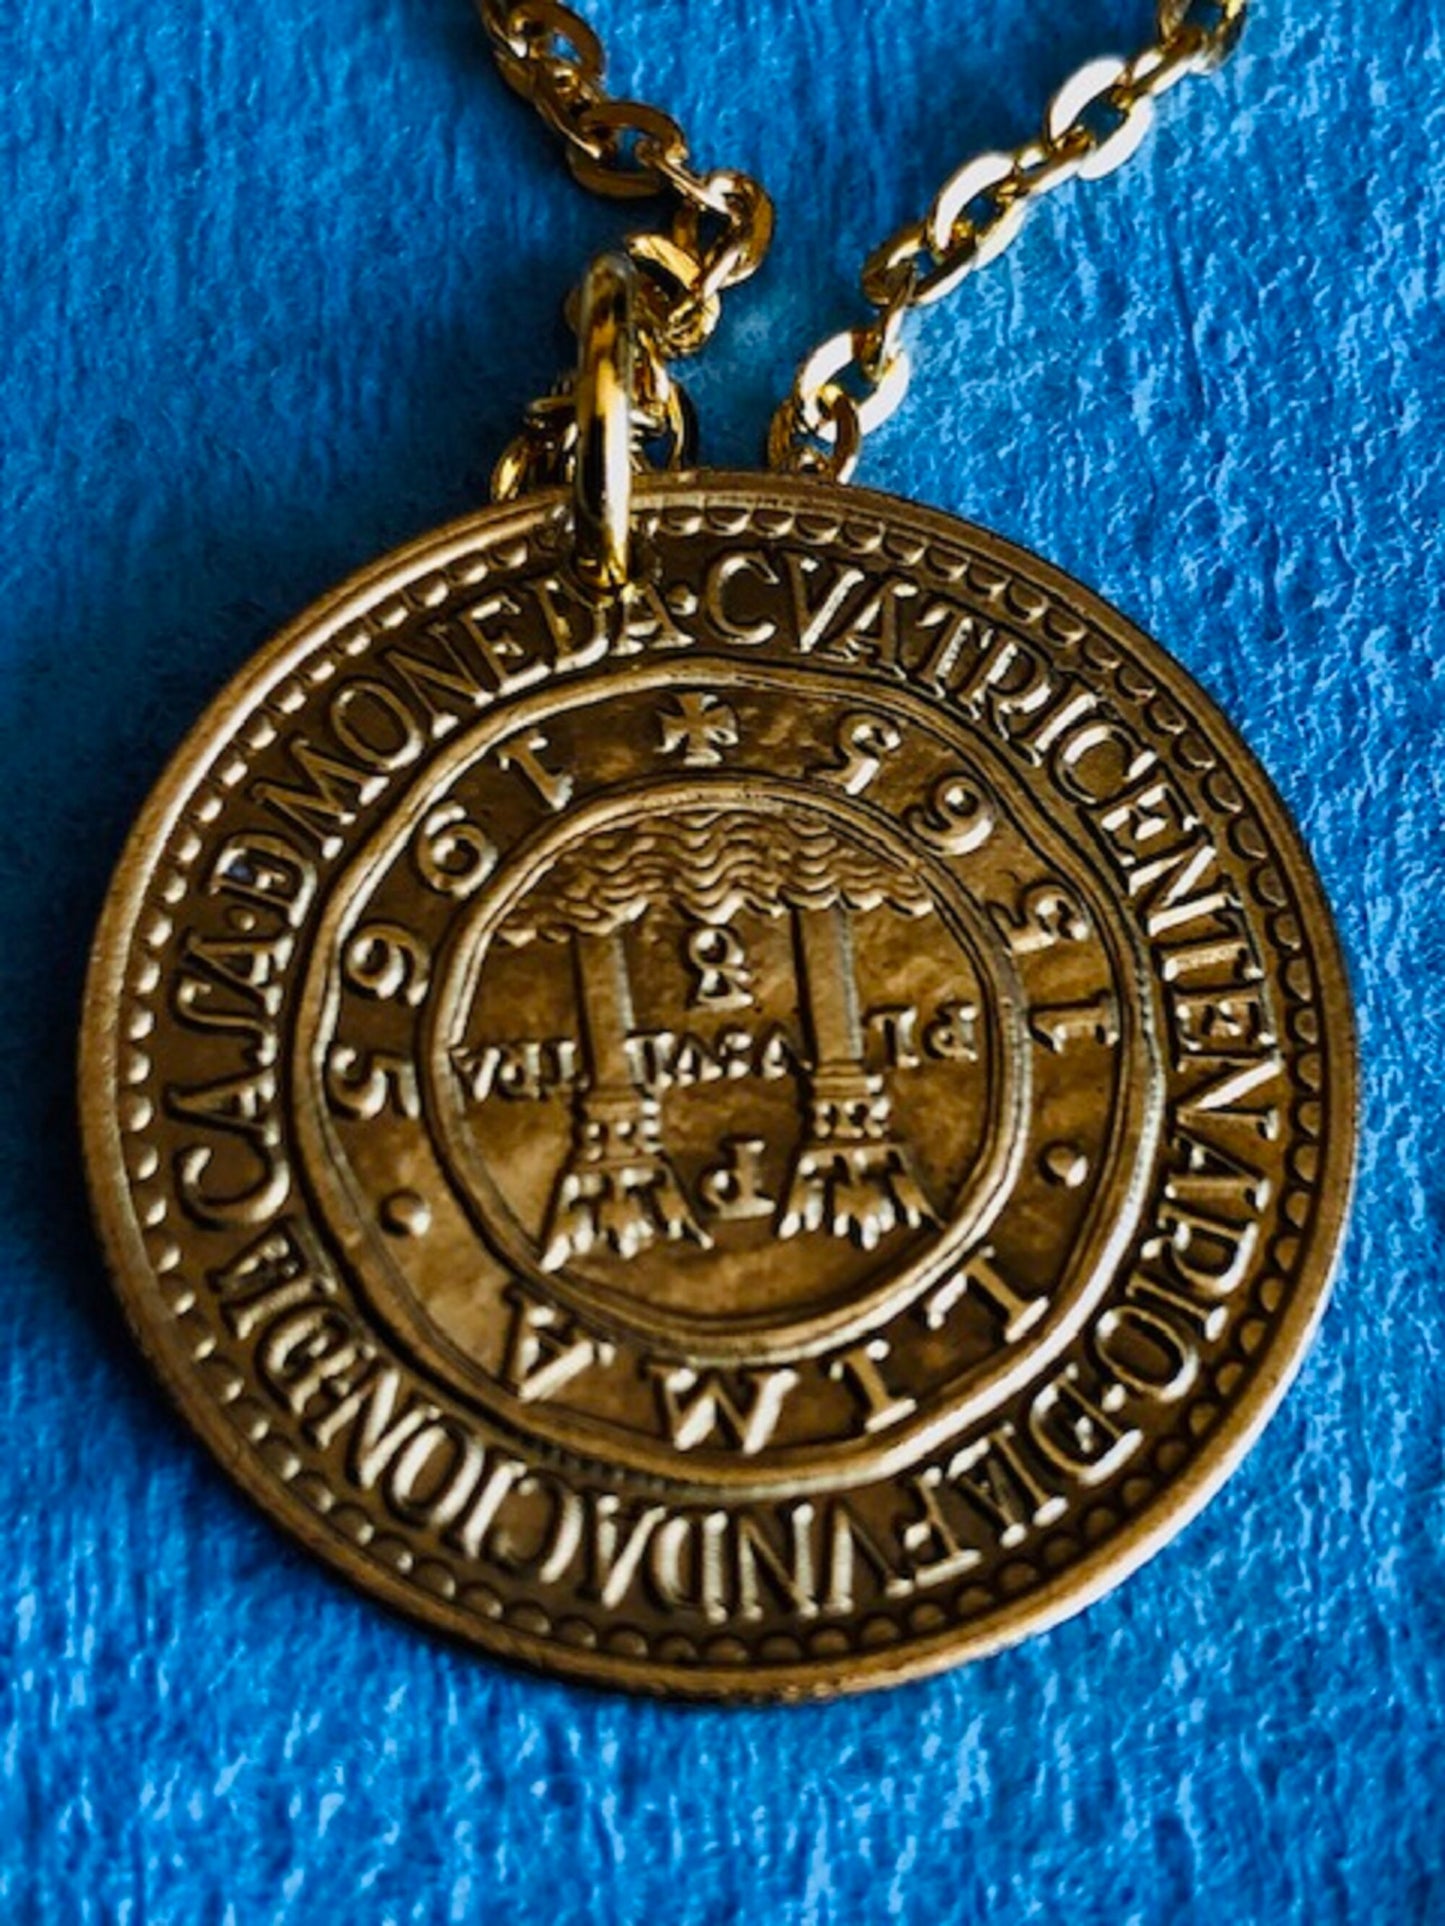 Peru Coin Pendant Peruvian UN Sol De Oro Personal Necklace Old Vintage Handmade Jewelry Gift Friend Charm For Him Her World Coin Collector